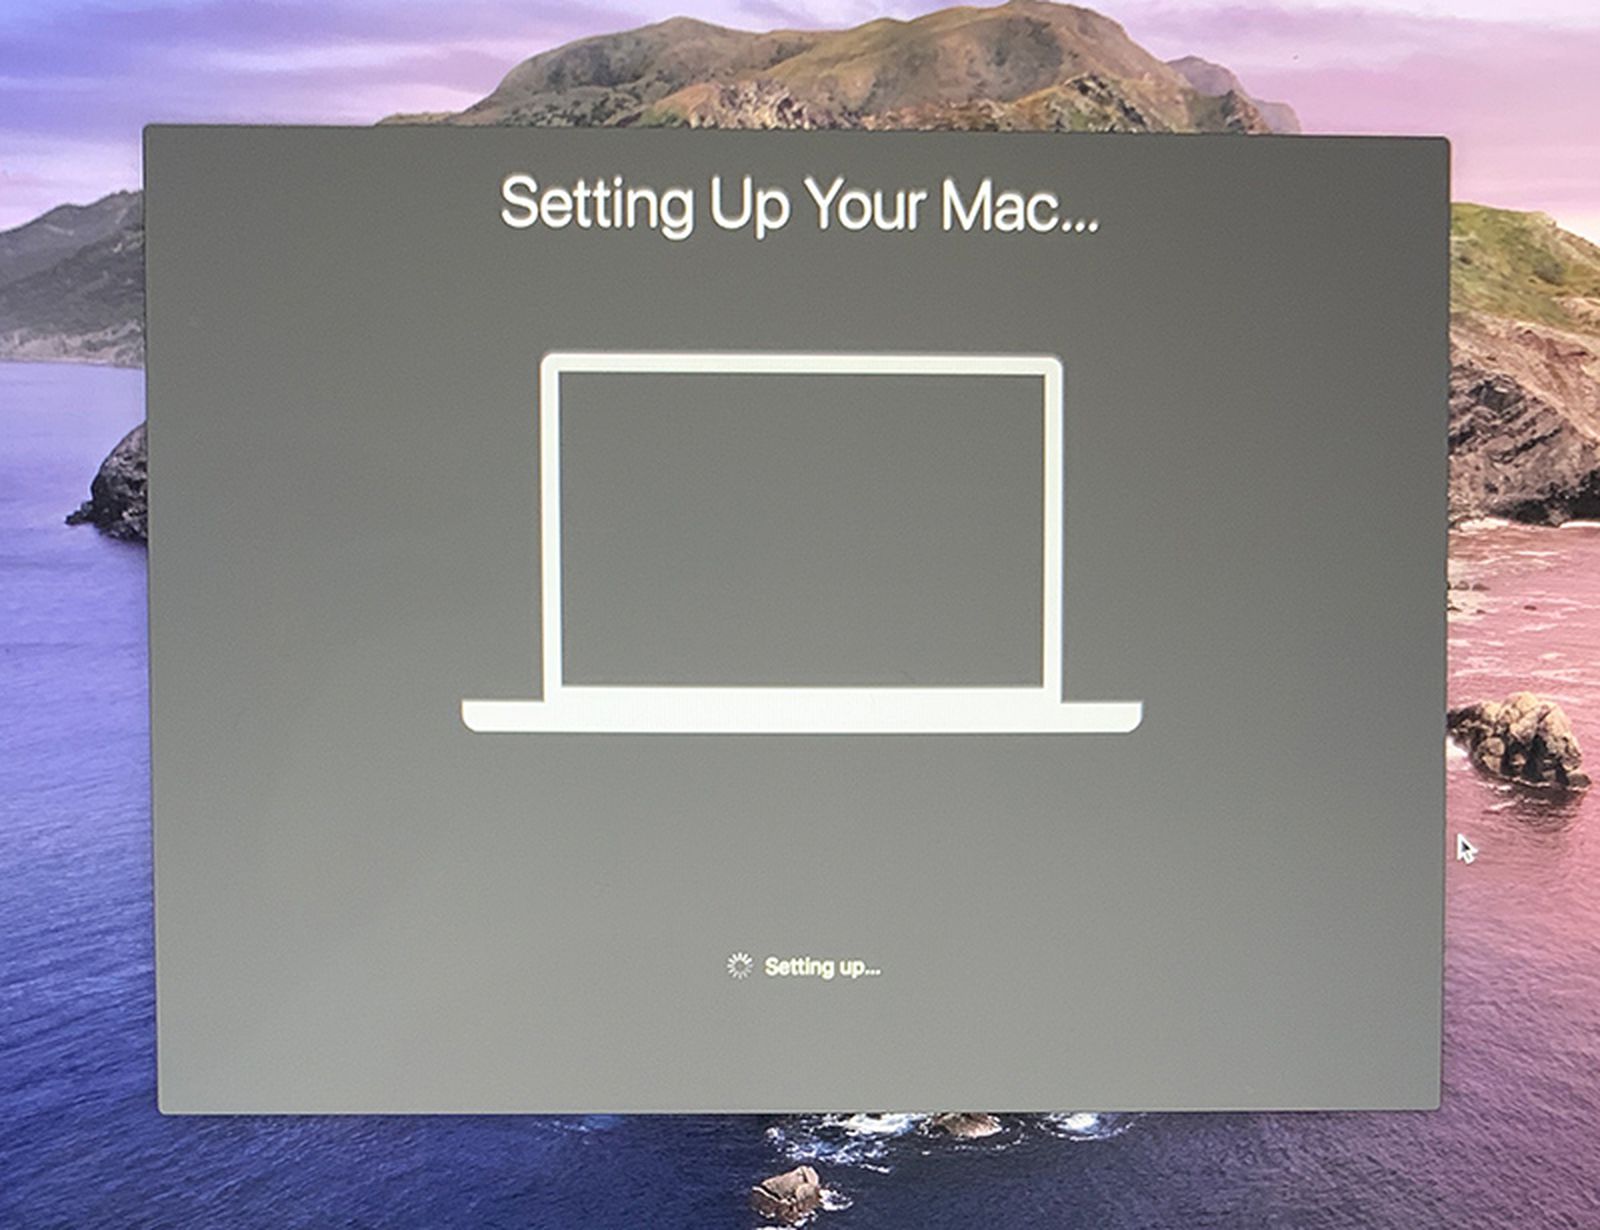 Macos Waiting For Other Installations To Complete